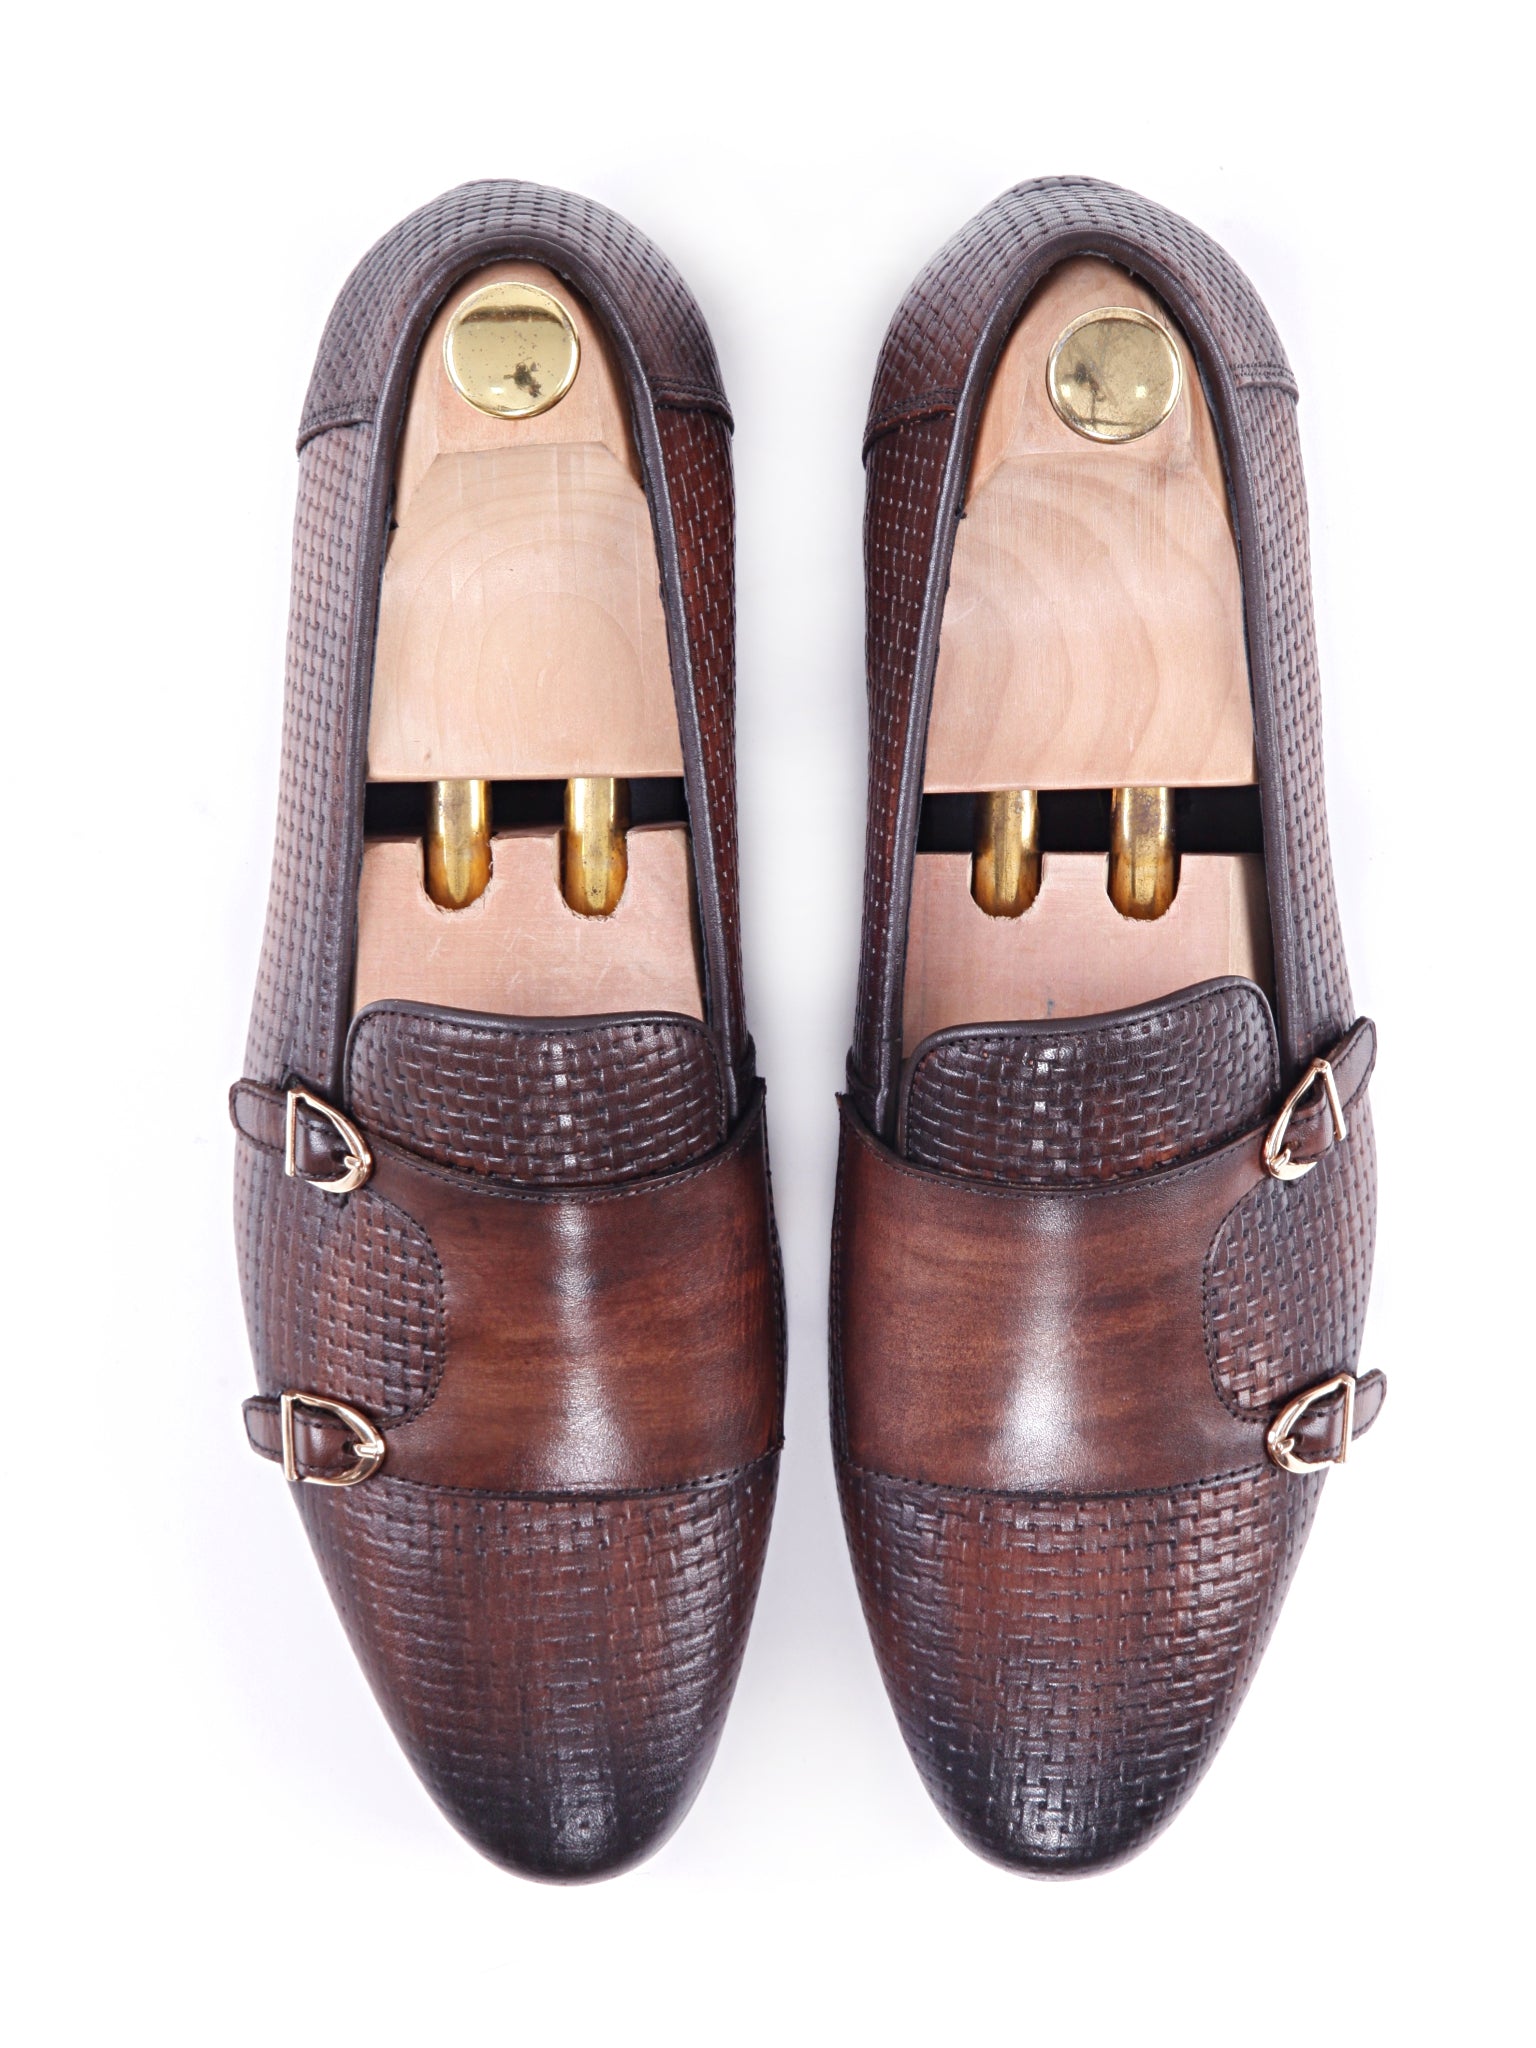 Loafer Slipper - Dark Brown Double Monk Strap with Woven Leather (Hand Painted Patina) - Zeve Shoes